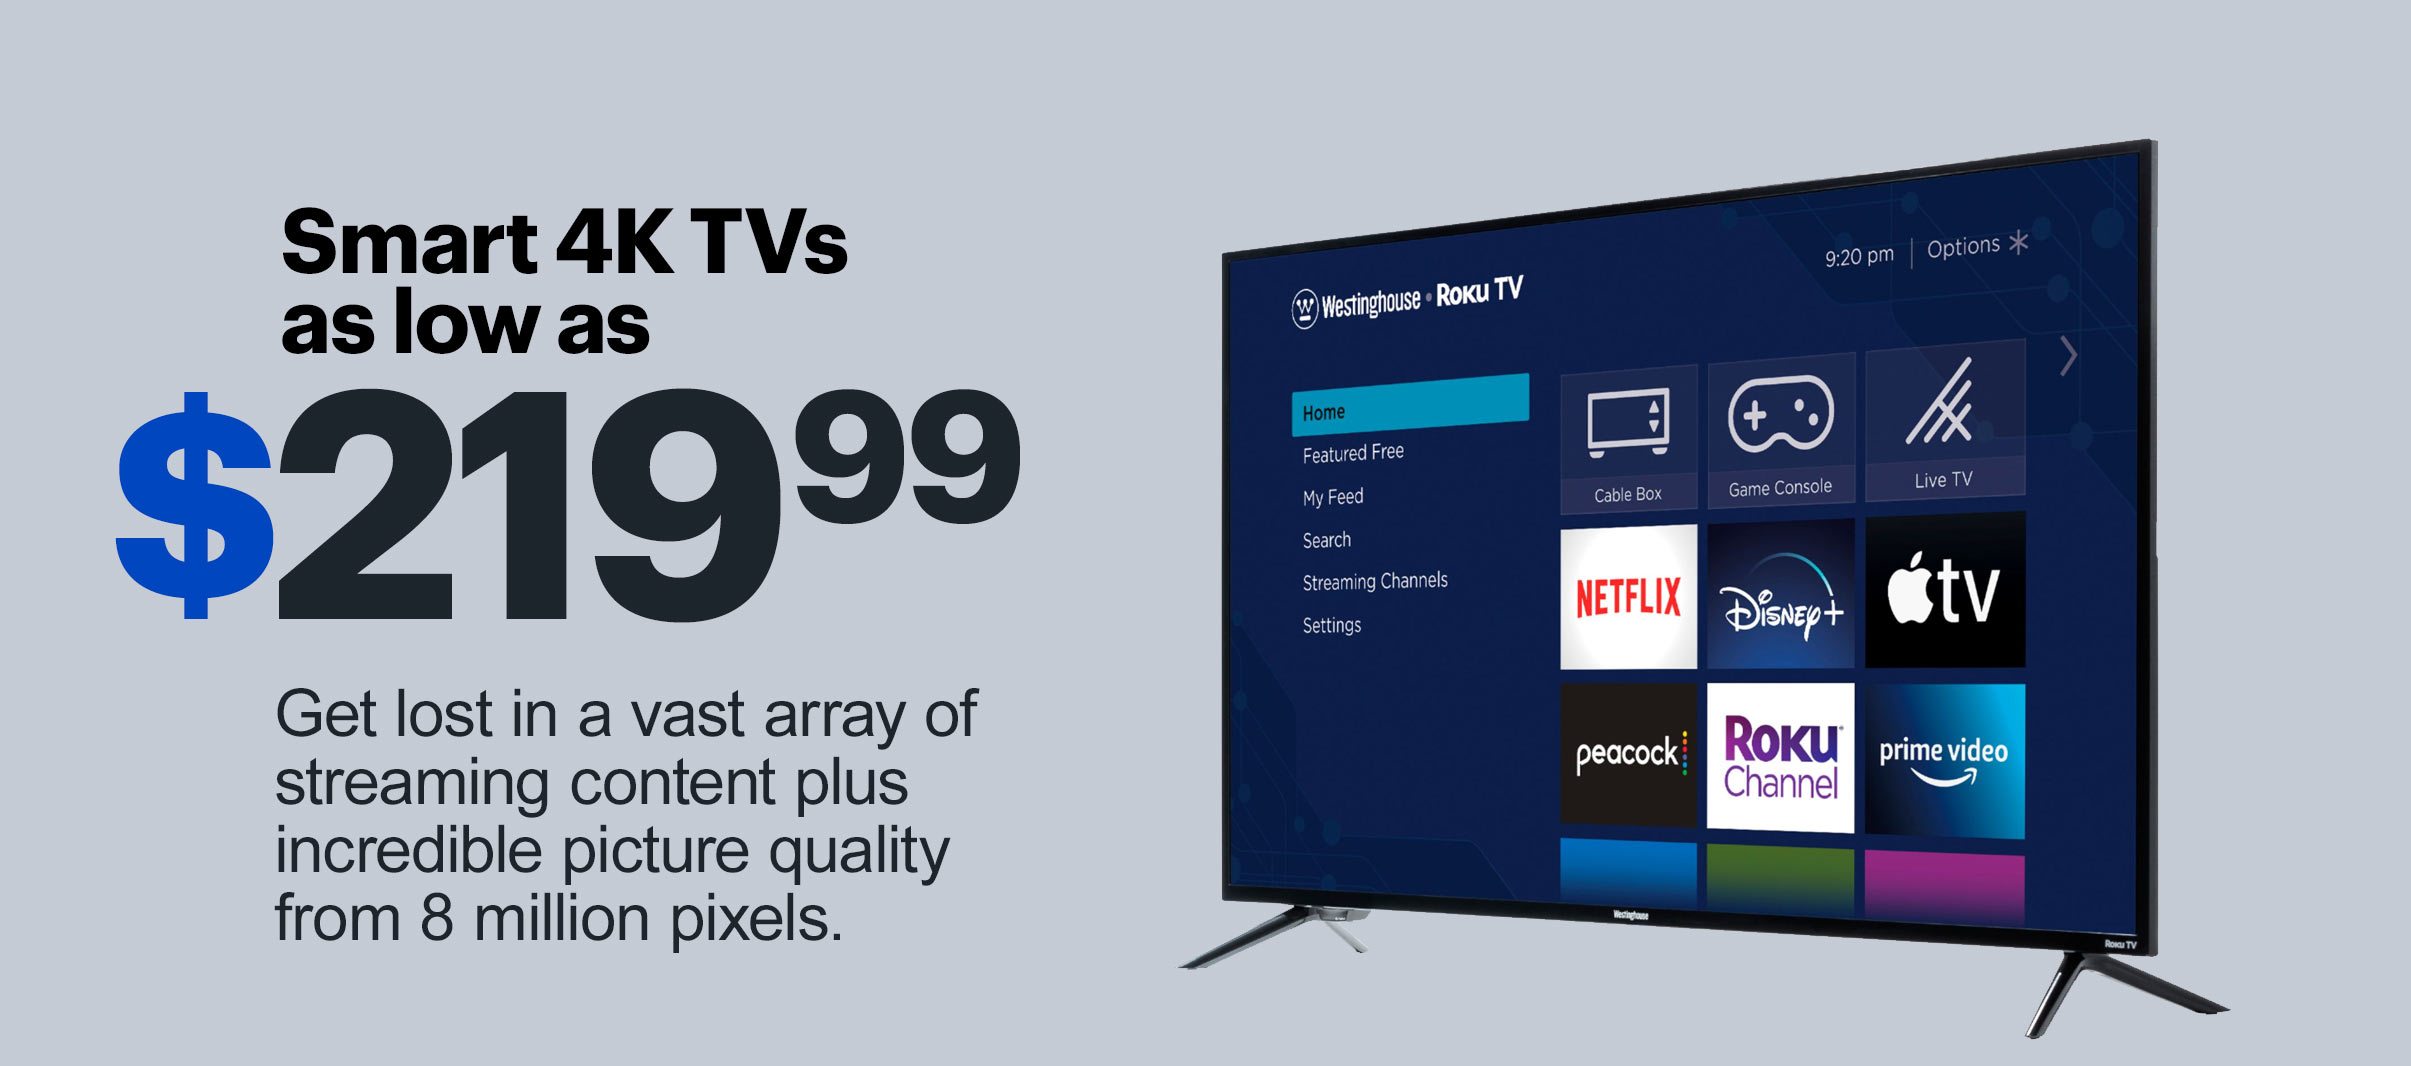 Smart 4K TVs as low as $219.99. Get lost in a vast array of streaming content plus incredible picture quality from 8 million pixels.